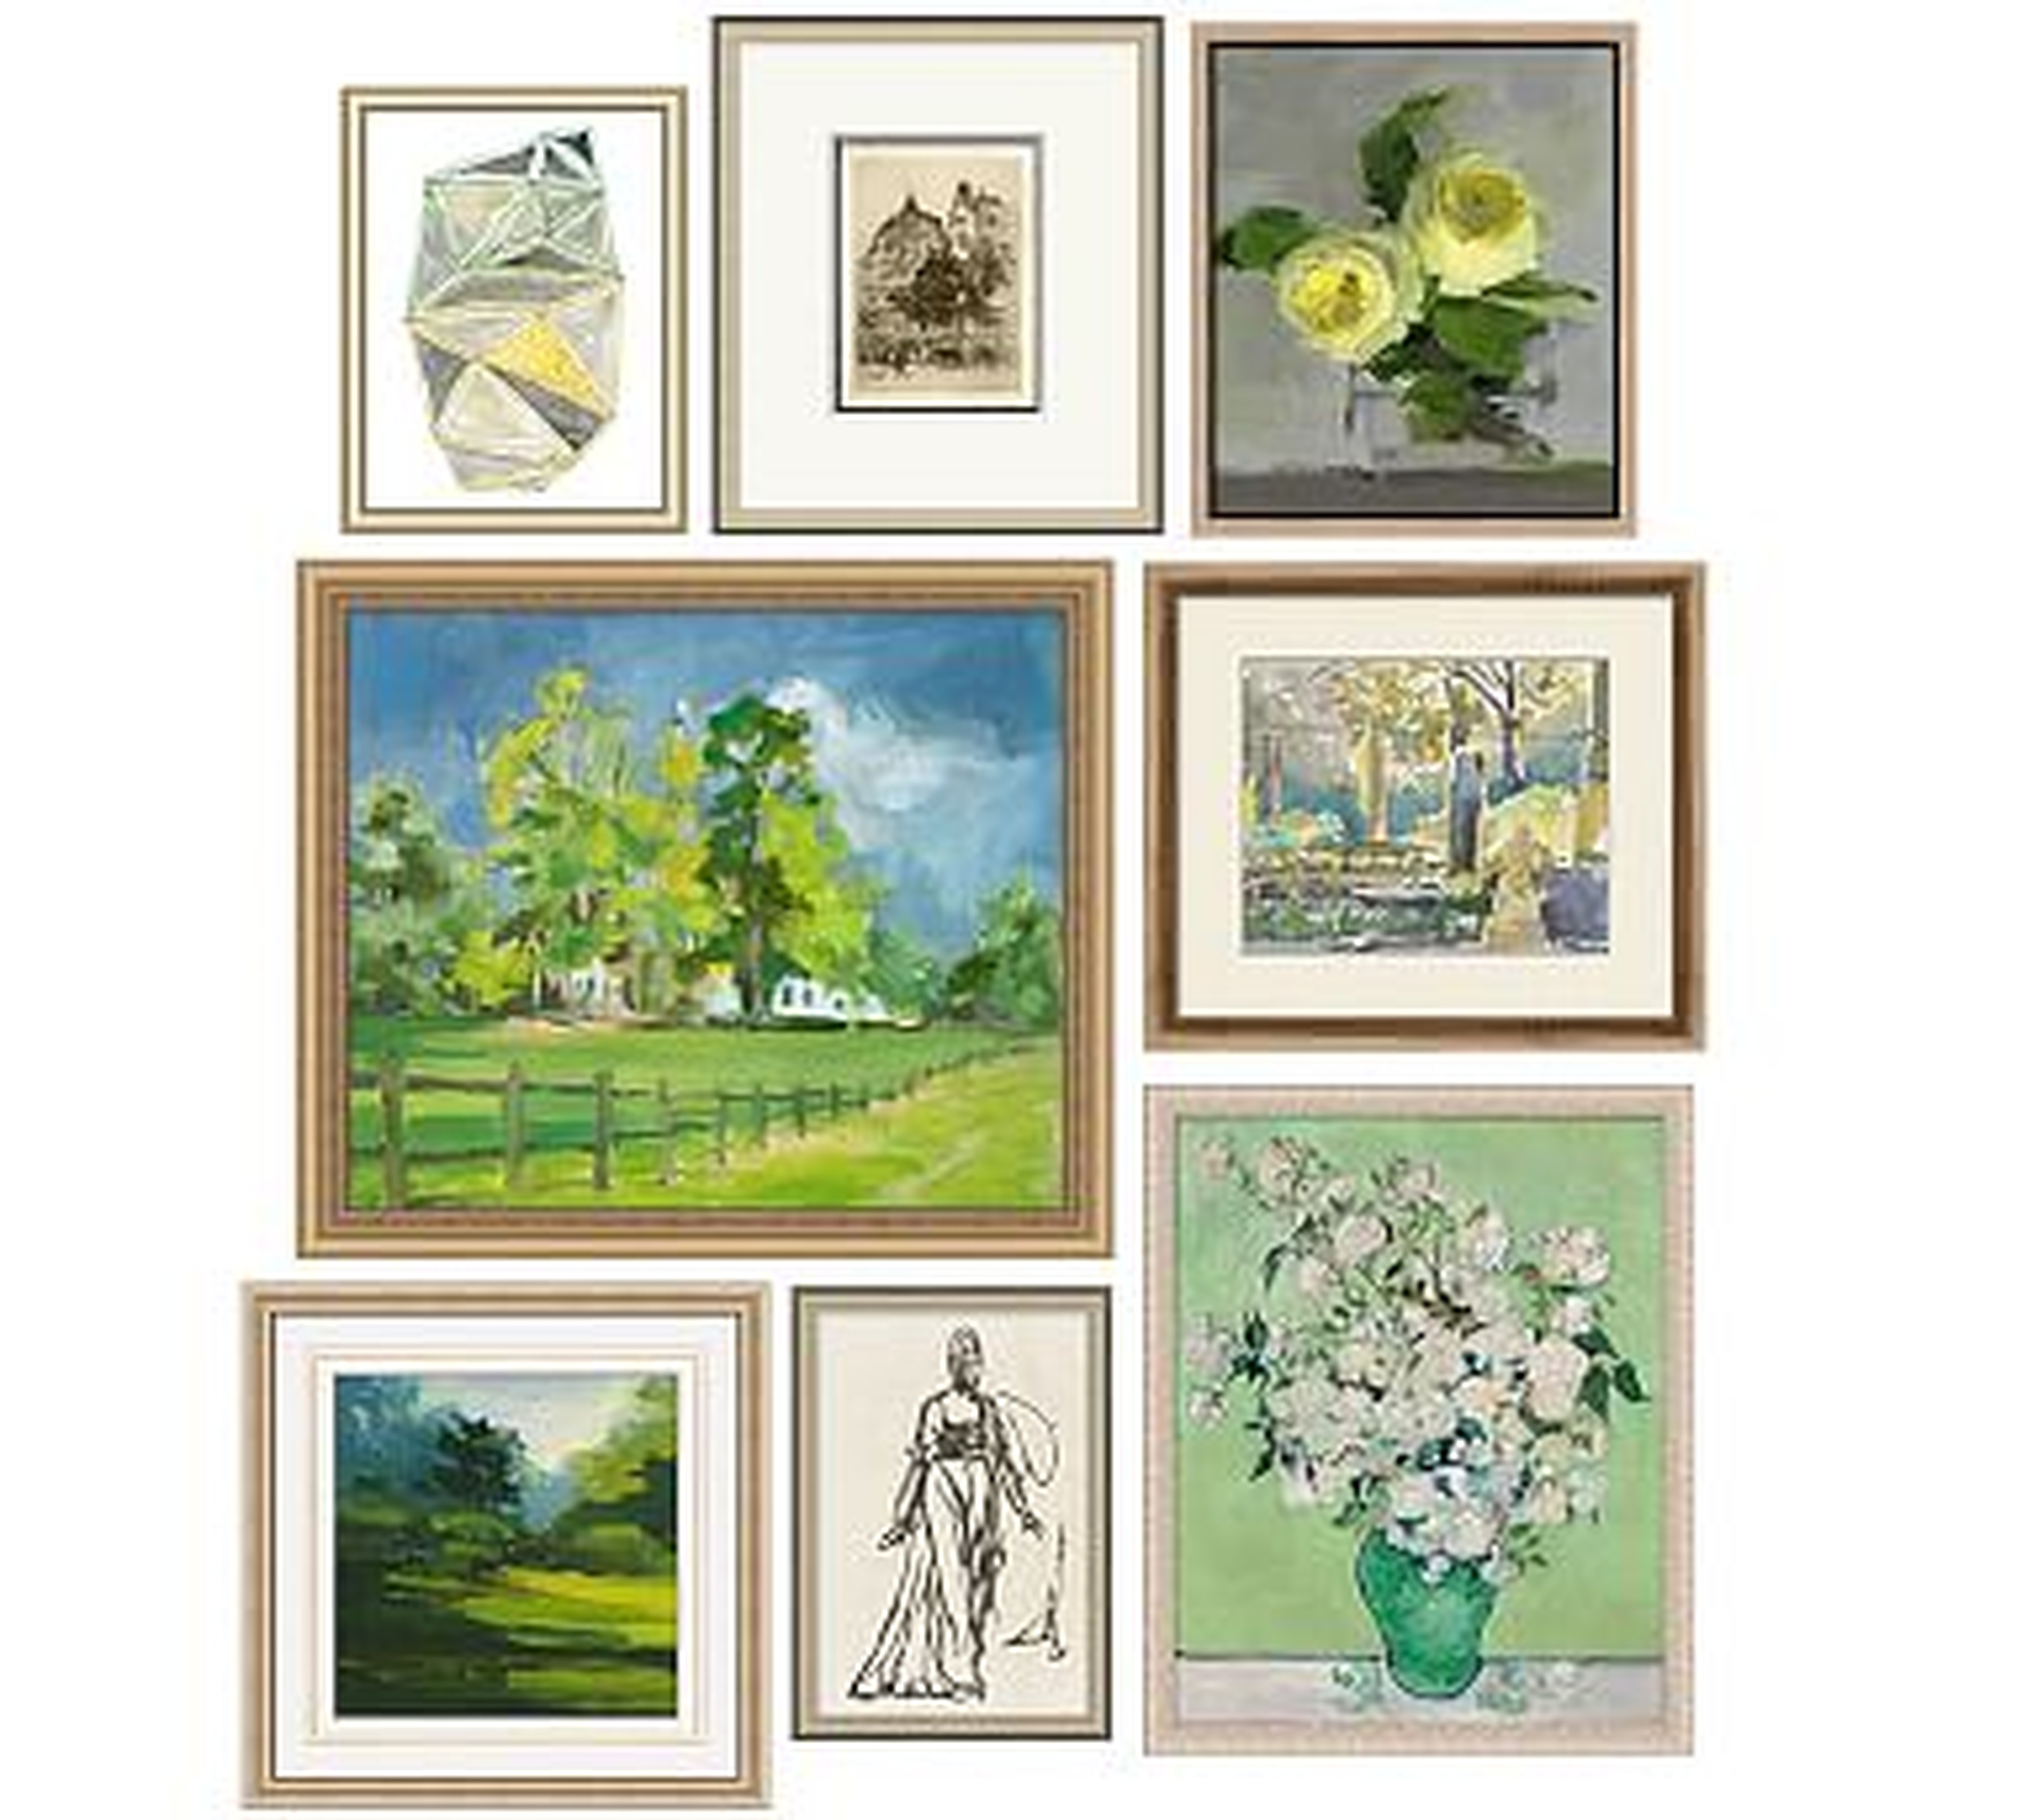 Entryway Art Gallery in a Box, Set of 8 - Pottery Barn